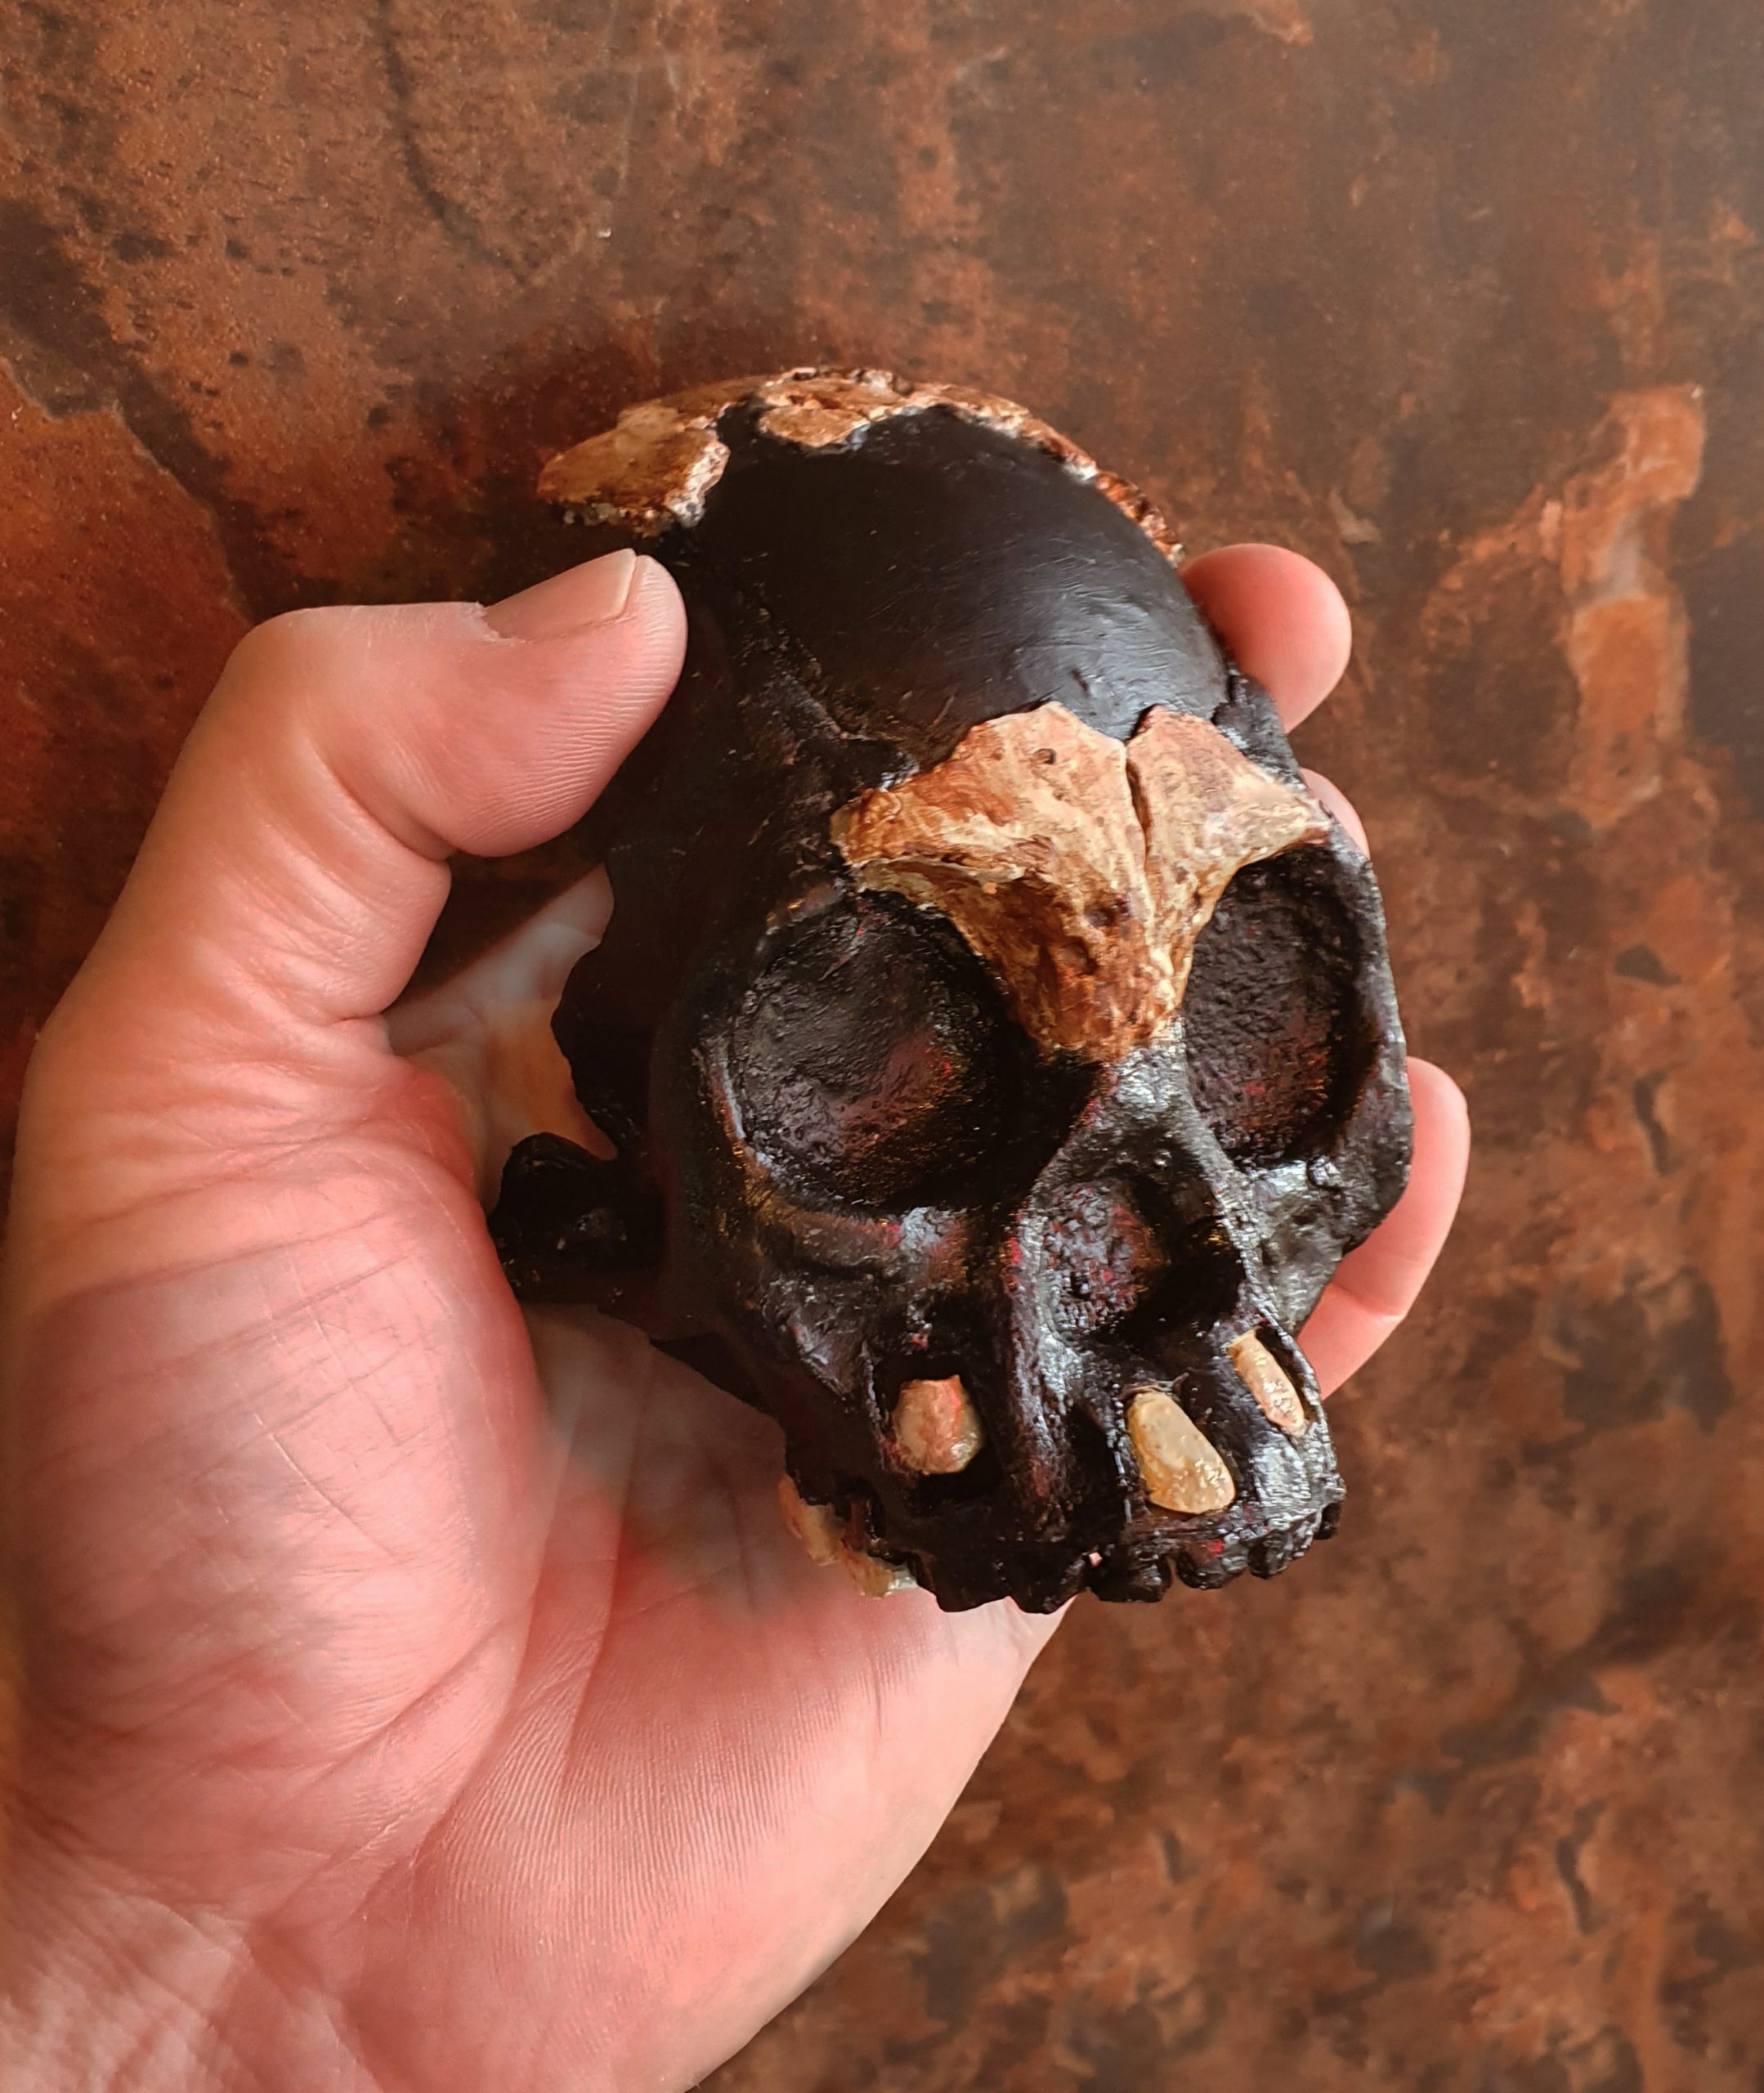 This view of the reconstructed skull, held by a human hand, provides a sense of scale.  (Image: Image: University of the Witwatersrand, Johannesburg.)